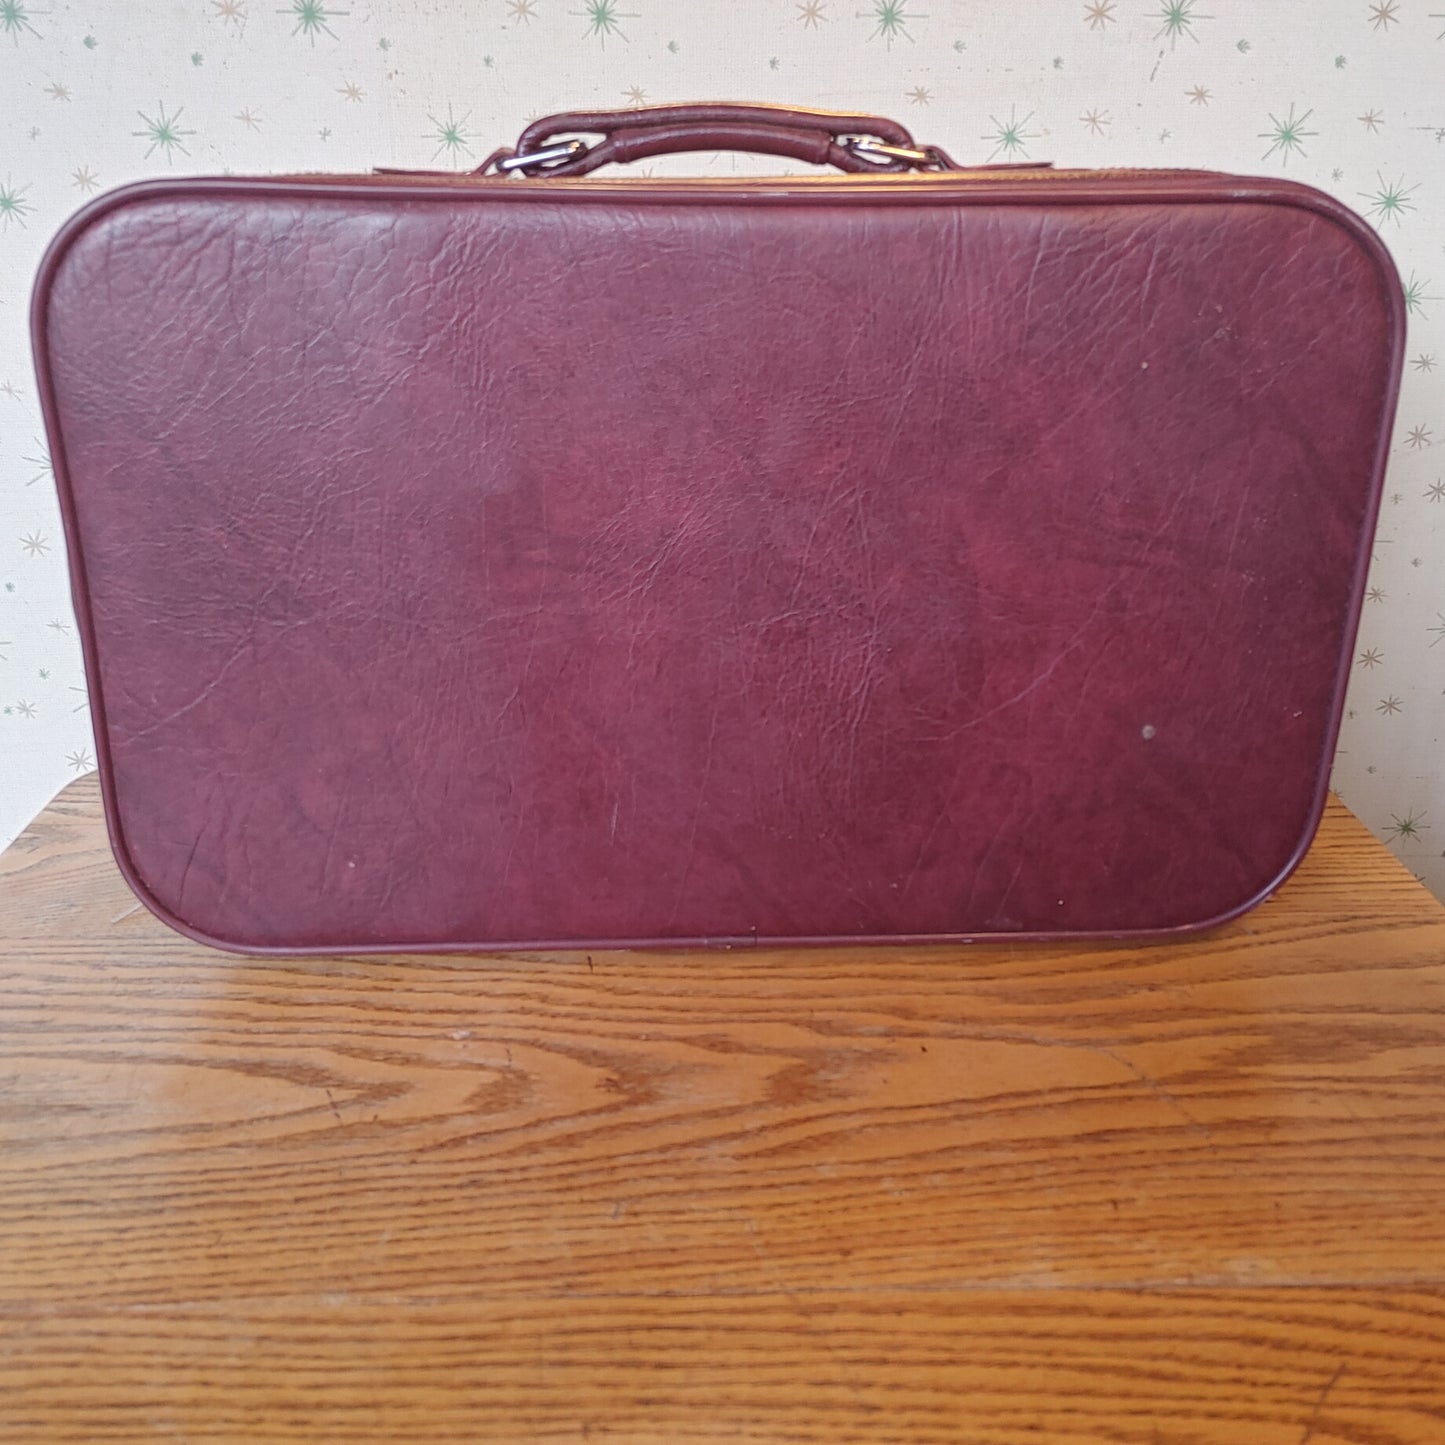 A Case For Suits! Vintage American Tourister Soft-side Suit Case 1986 Red Burgundy